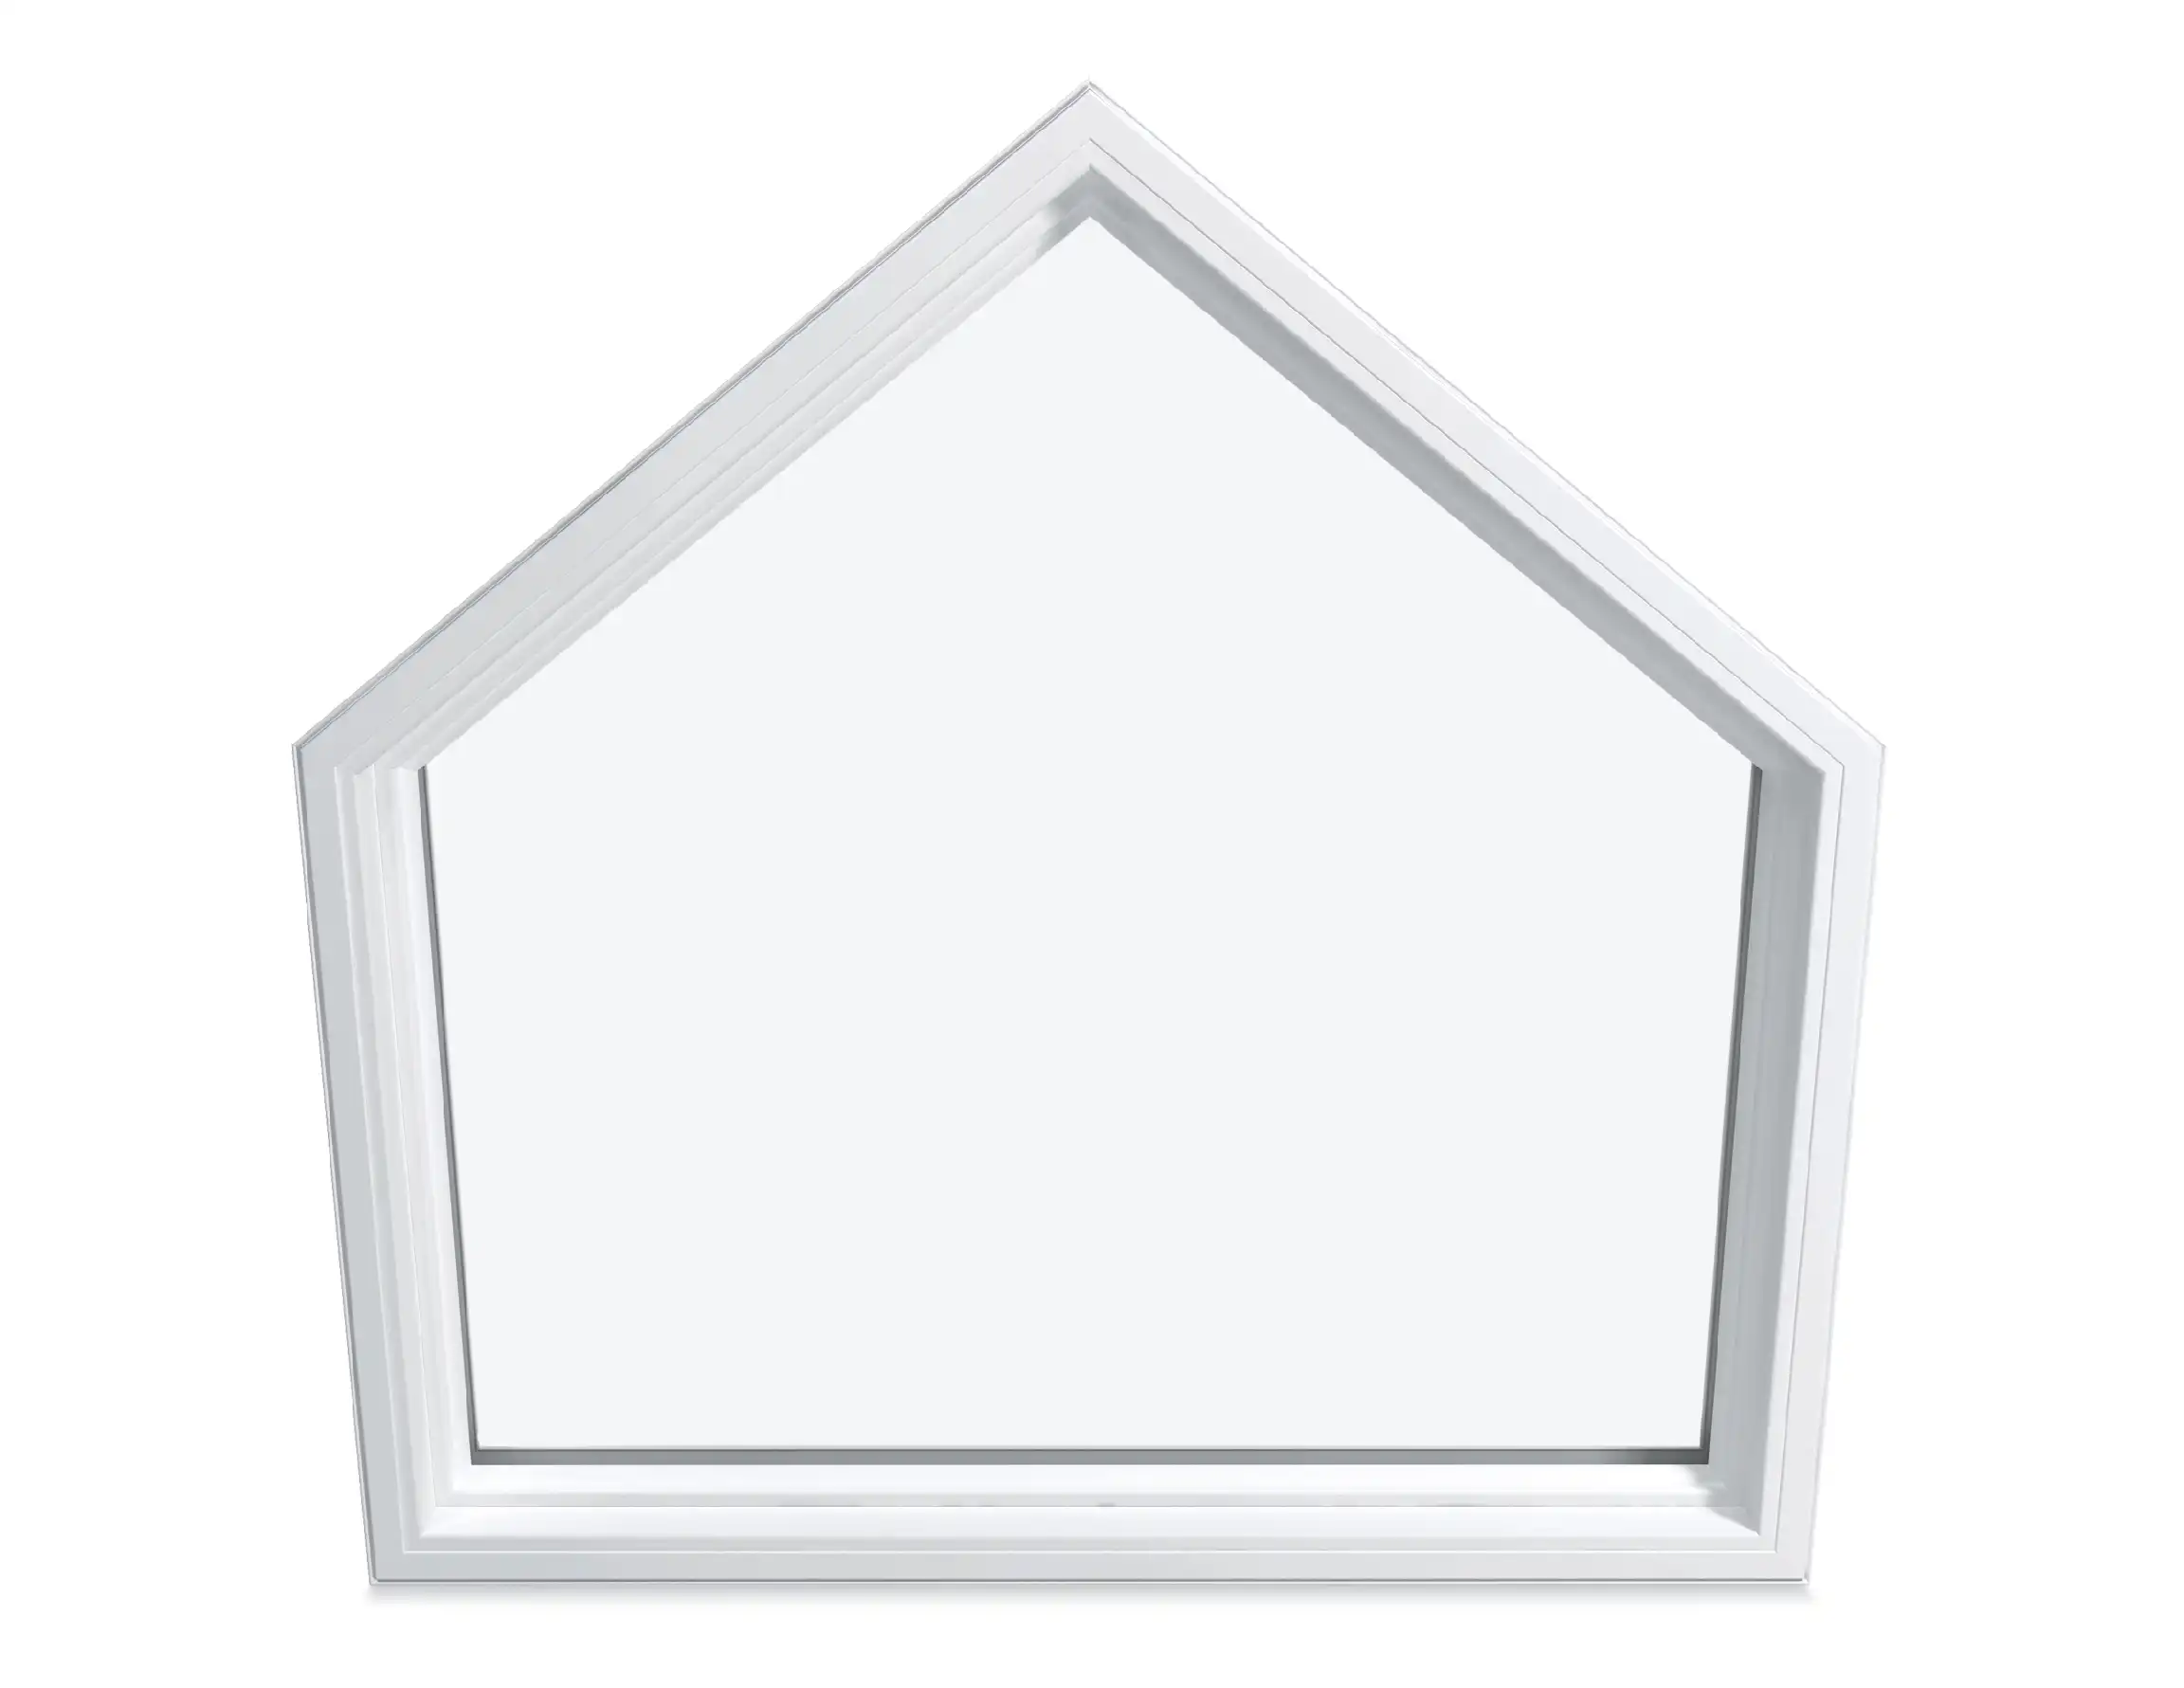 Image of a white Marvin Replacement Pentagon Special Shape Picture window.